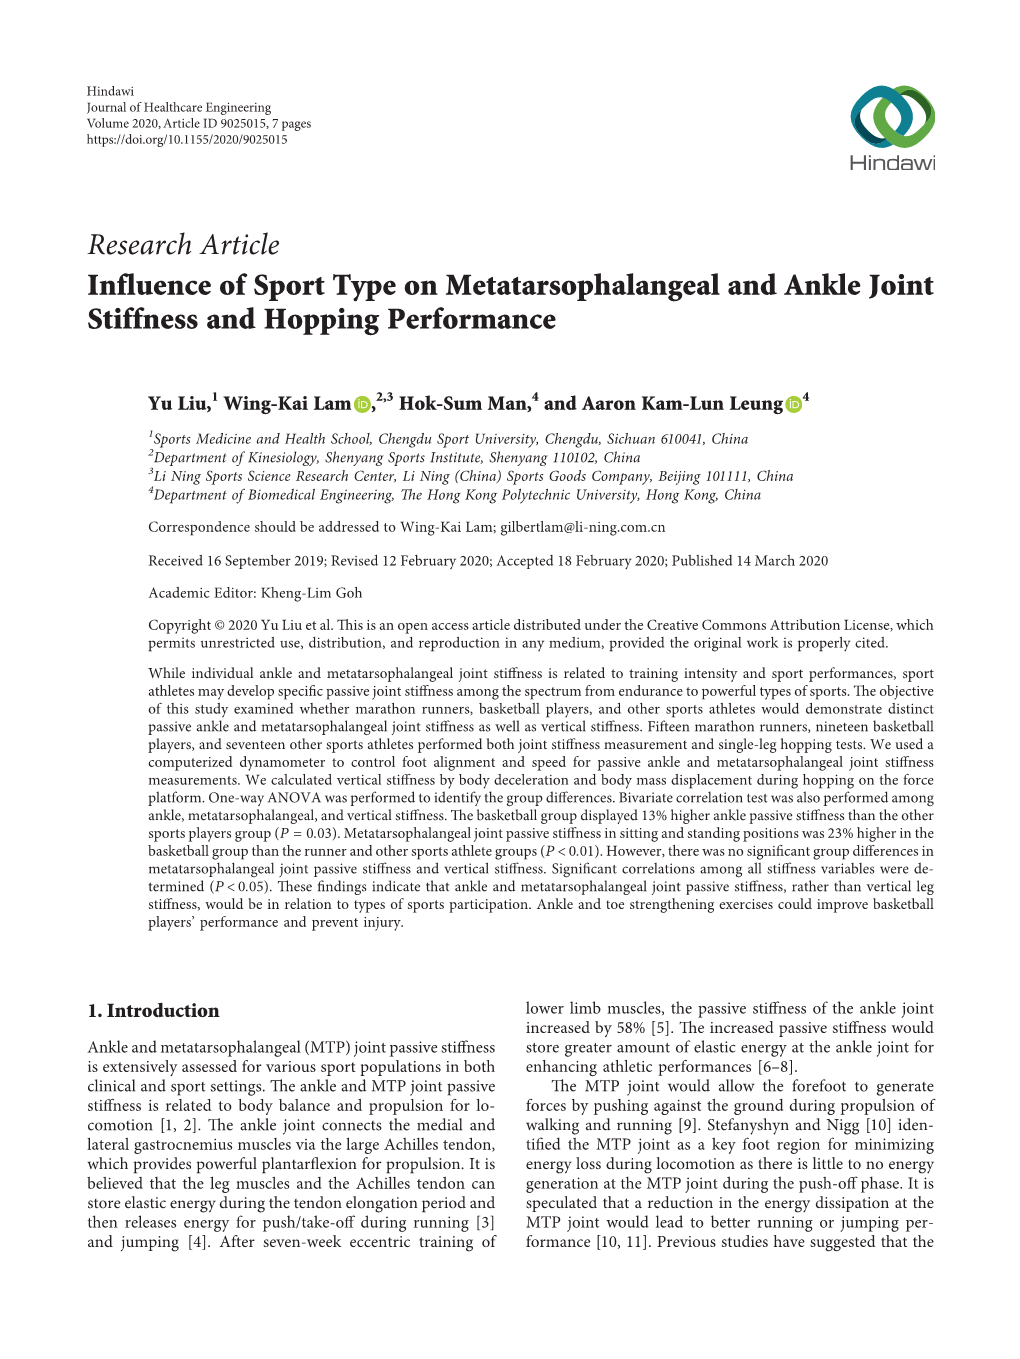 Research Article Influence of Sport Type on Metatarsophalangeal and Ankle Joint Stiffness and Hopping Performance